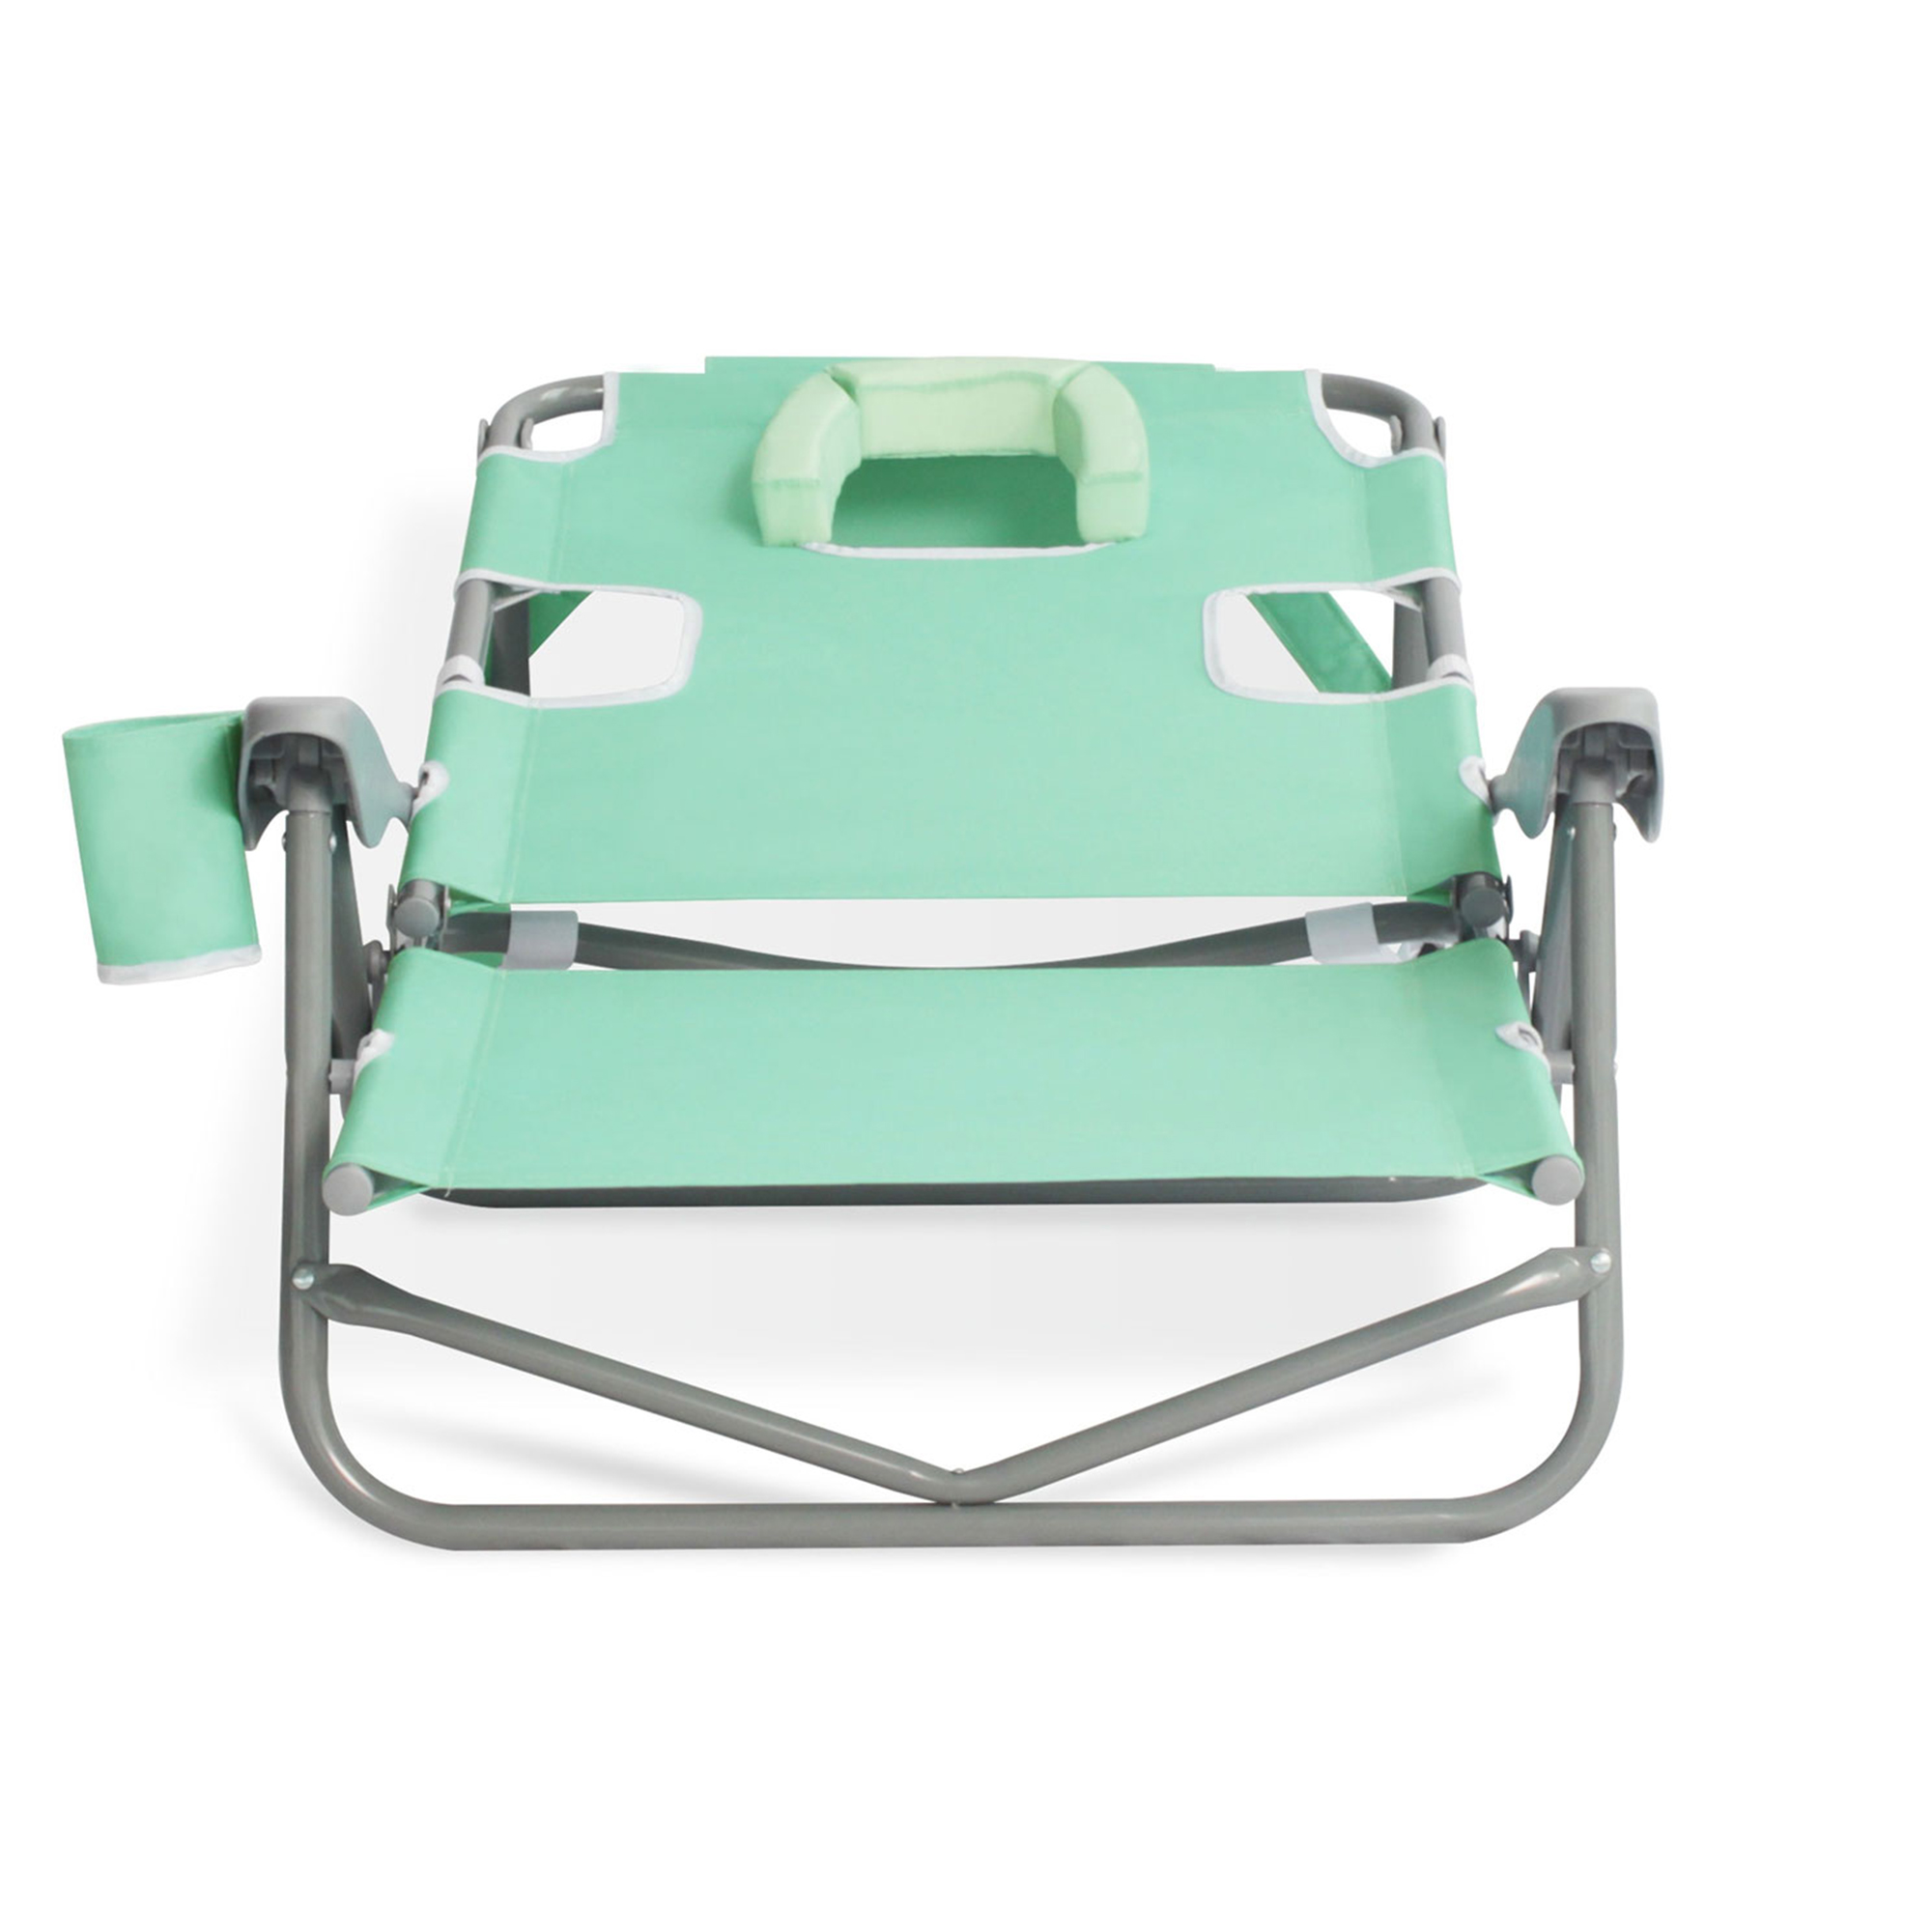 Ostrich On-Your-Back Outdoor Reclining Beach Pool Camping Chair, Teal - image 7 of 12